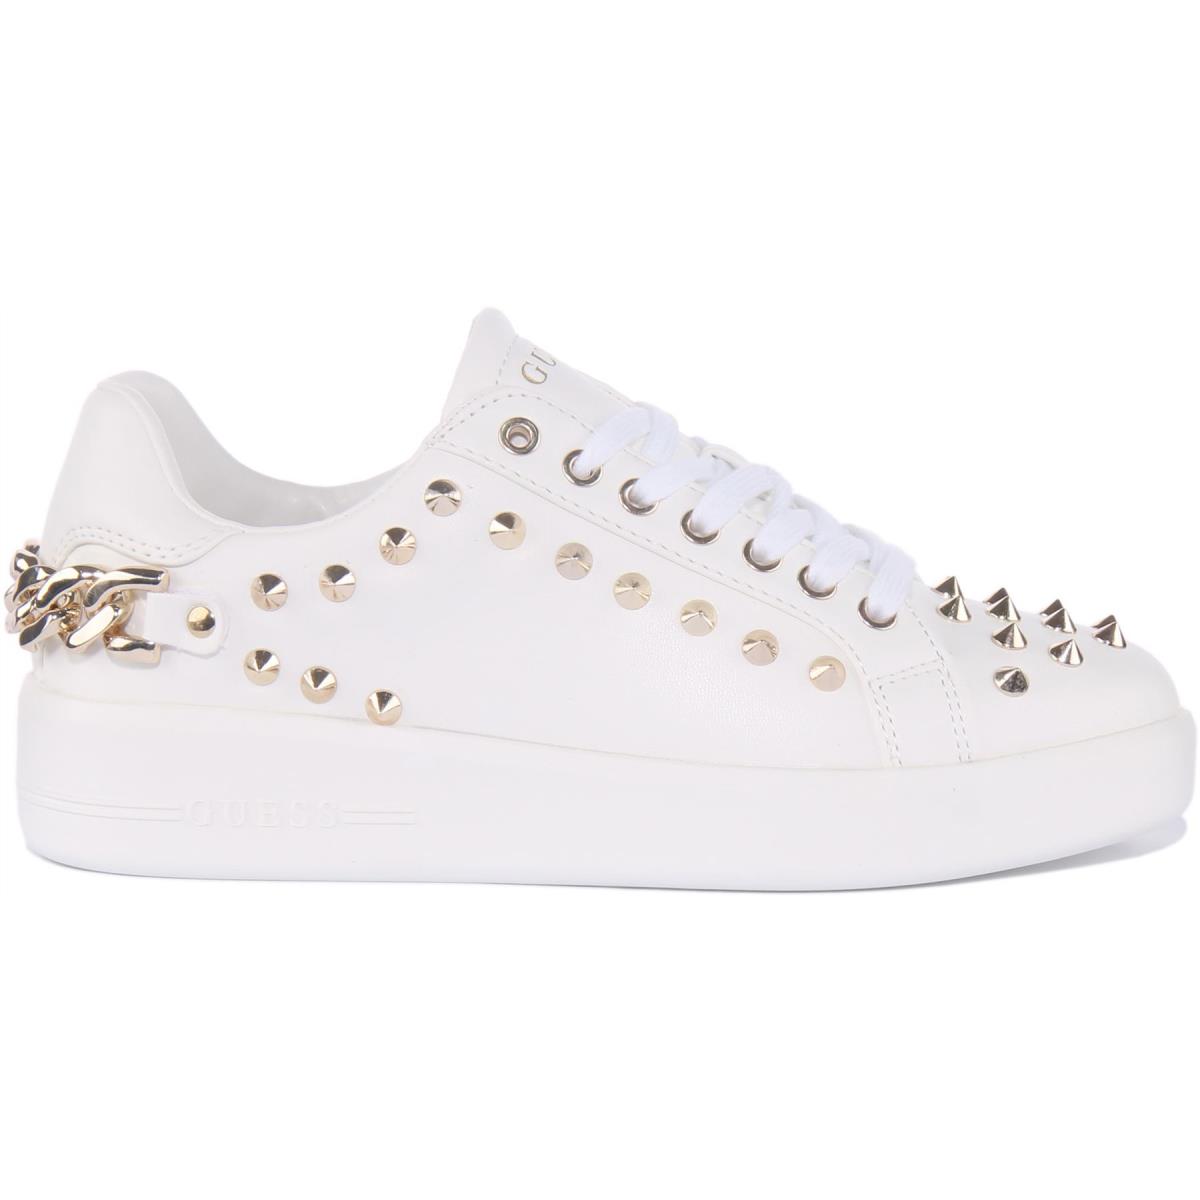 Guess Fl7Rntlea12 Renatta Womens Lace Up Sneakers with Studs Size US 5 - 11